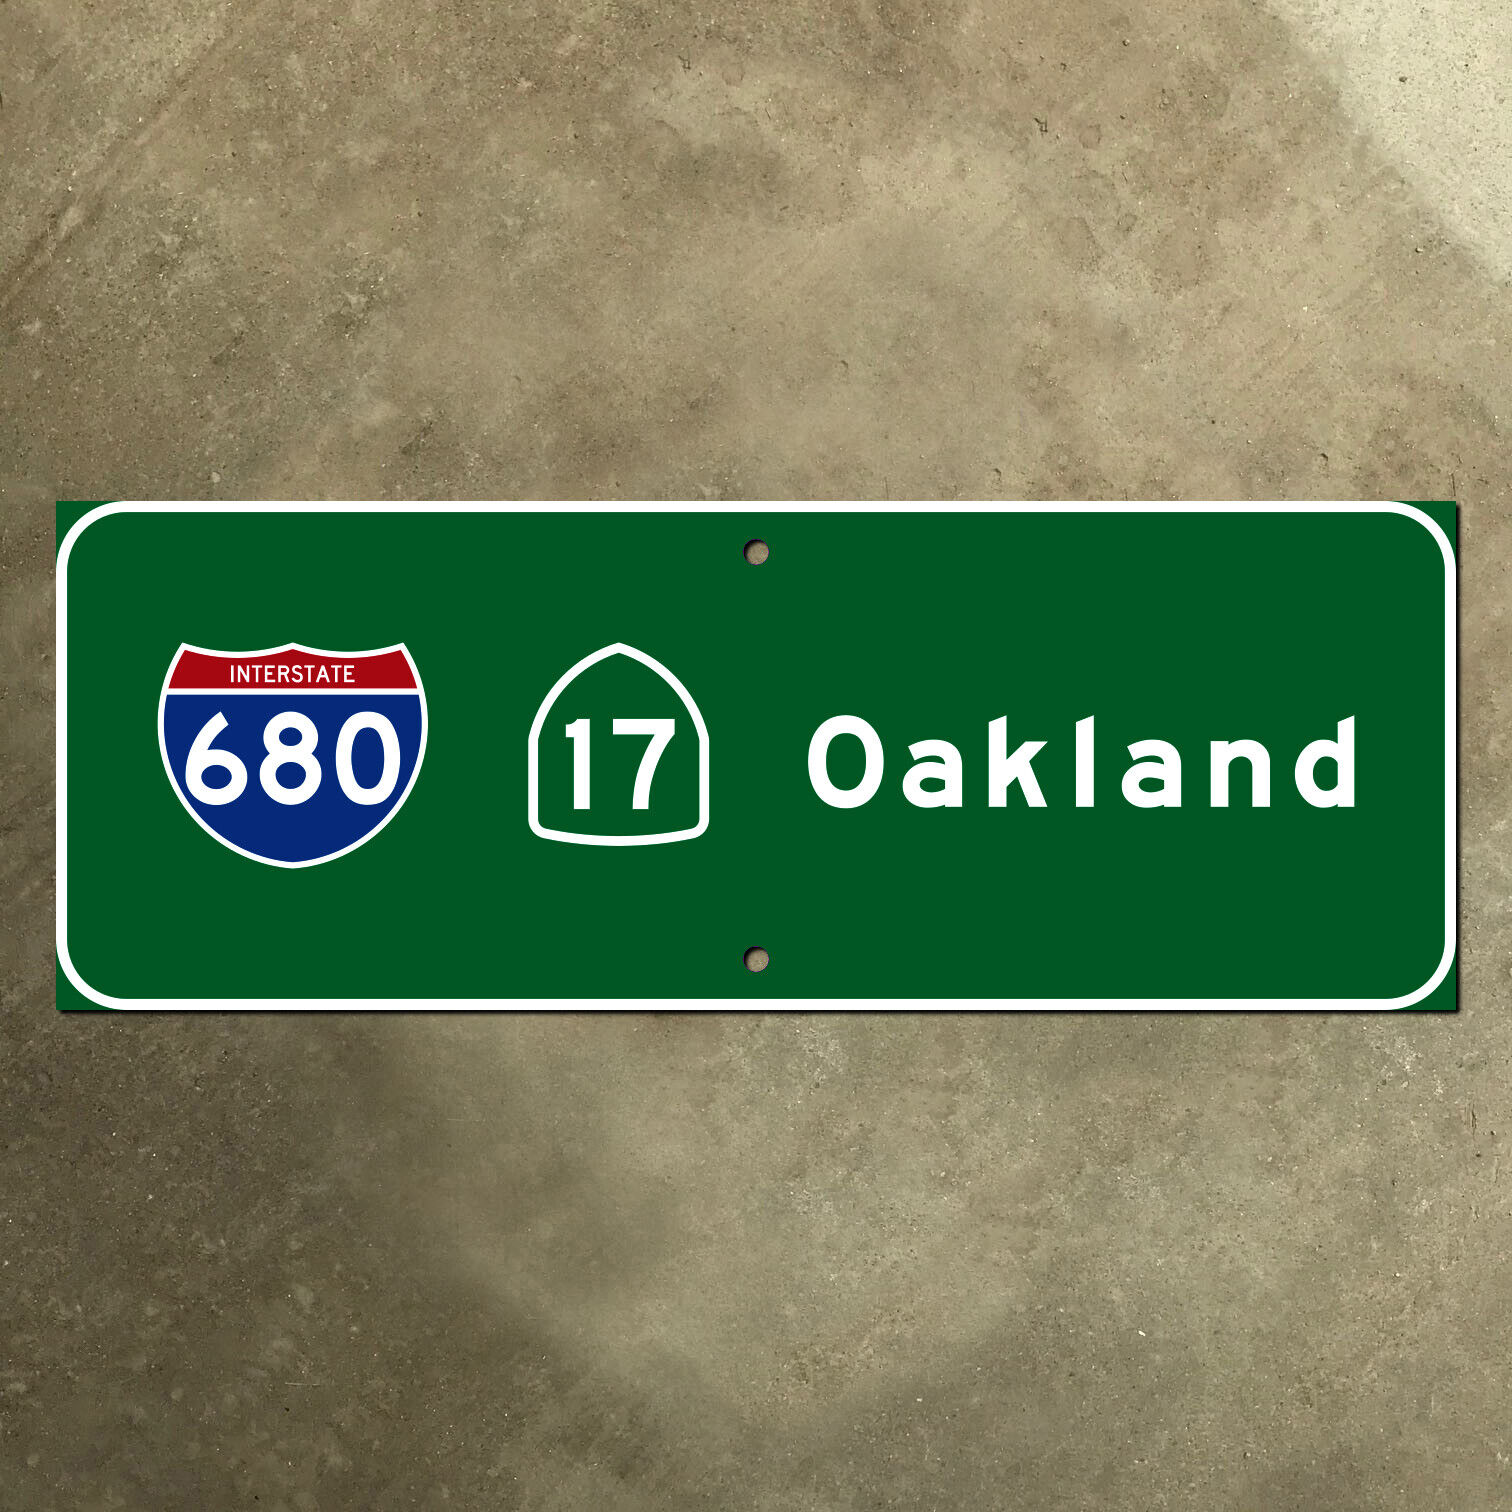 Oakland California interstate 680 state 17 road highway guide sign 1959 27x10